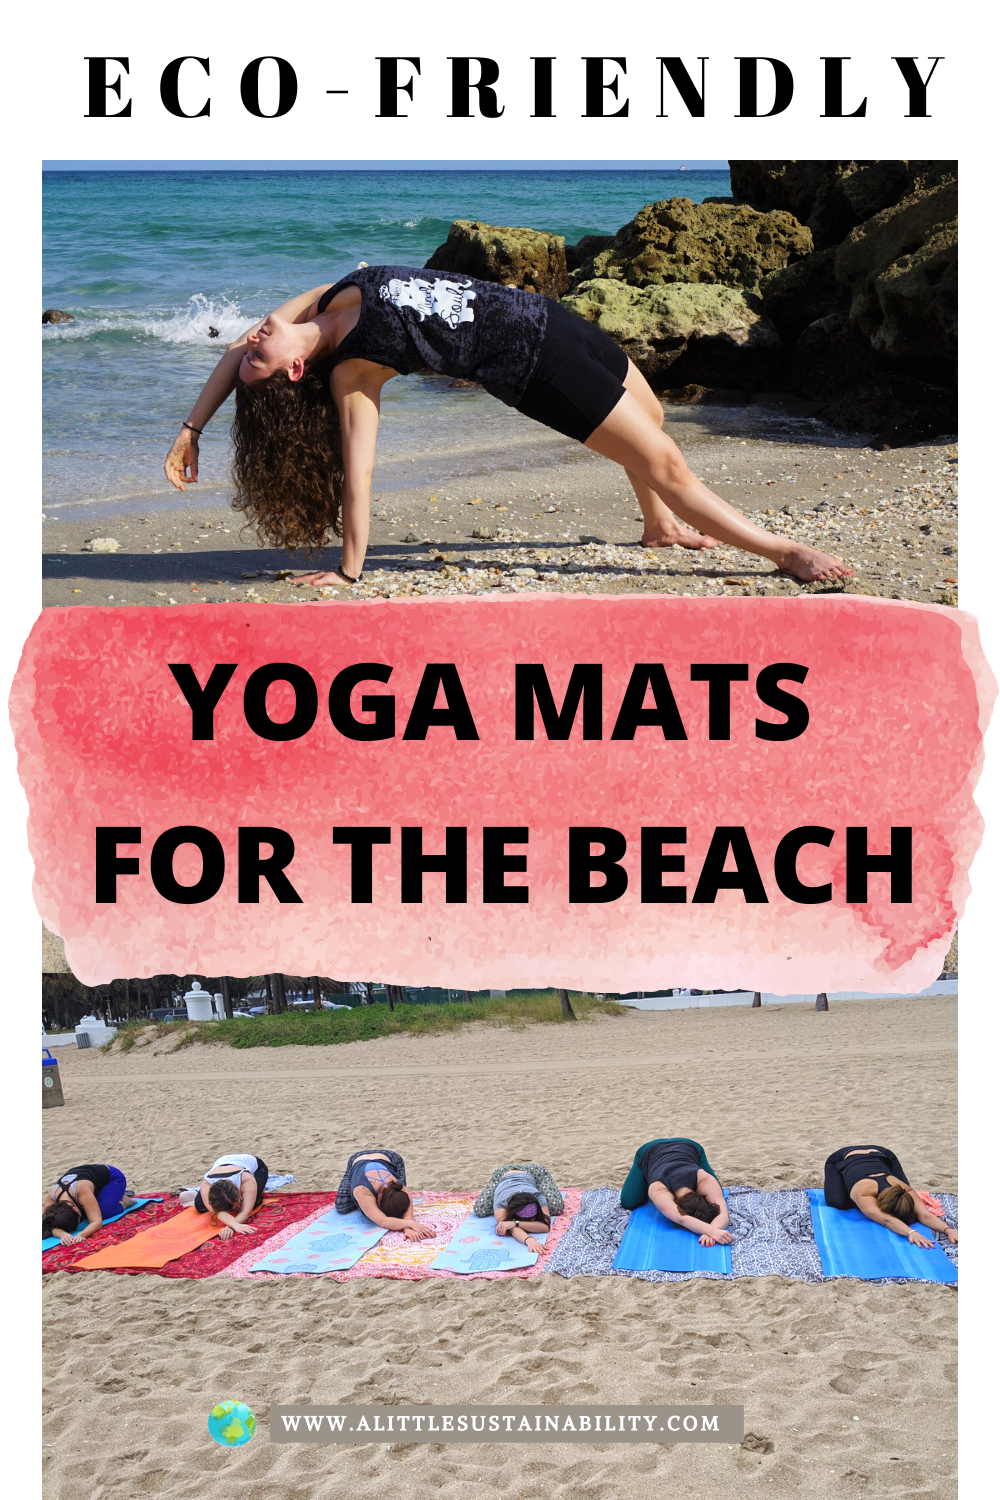 Hemp yoga mats are one of the best options for beach yoga. These eco-friendly yoga mats are lightweight, foldable, and washable, making them the ideal yoga mat for outdoors and for the beach.